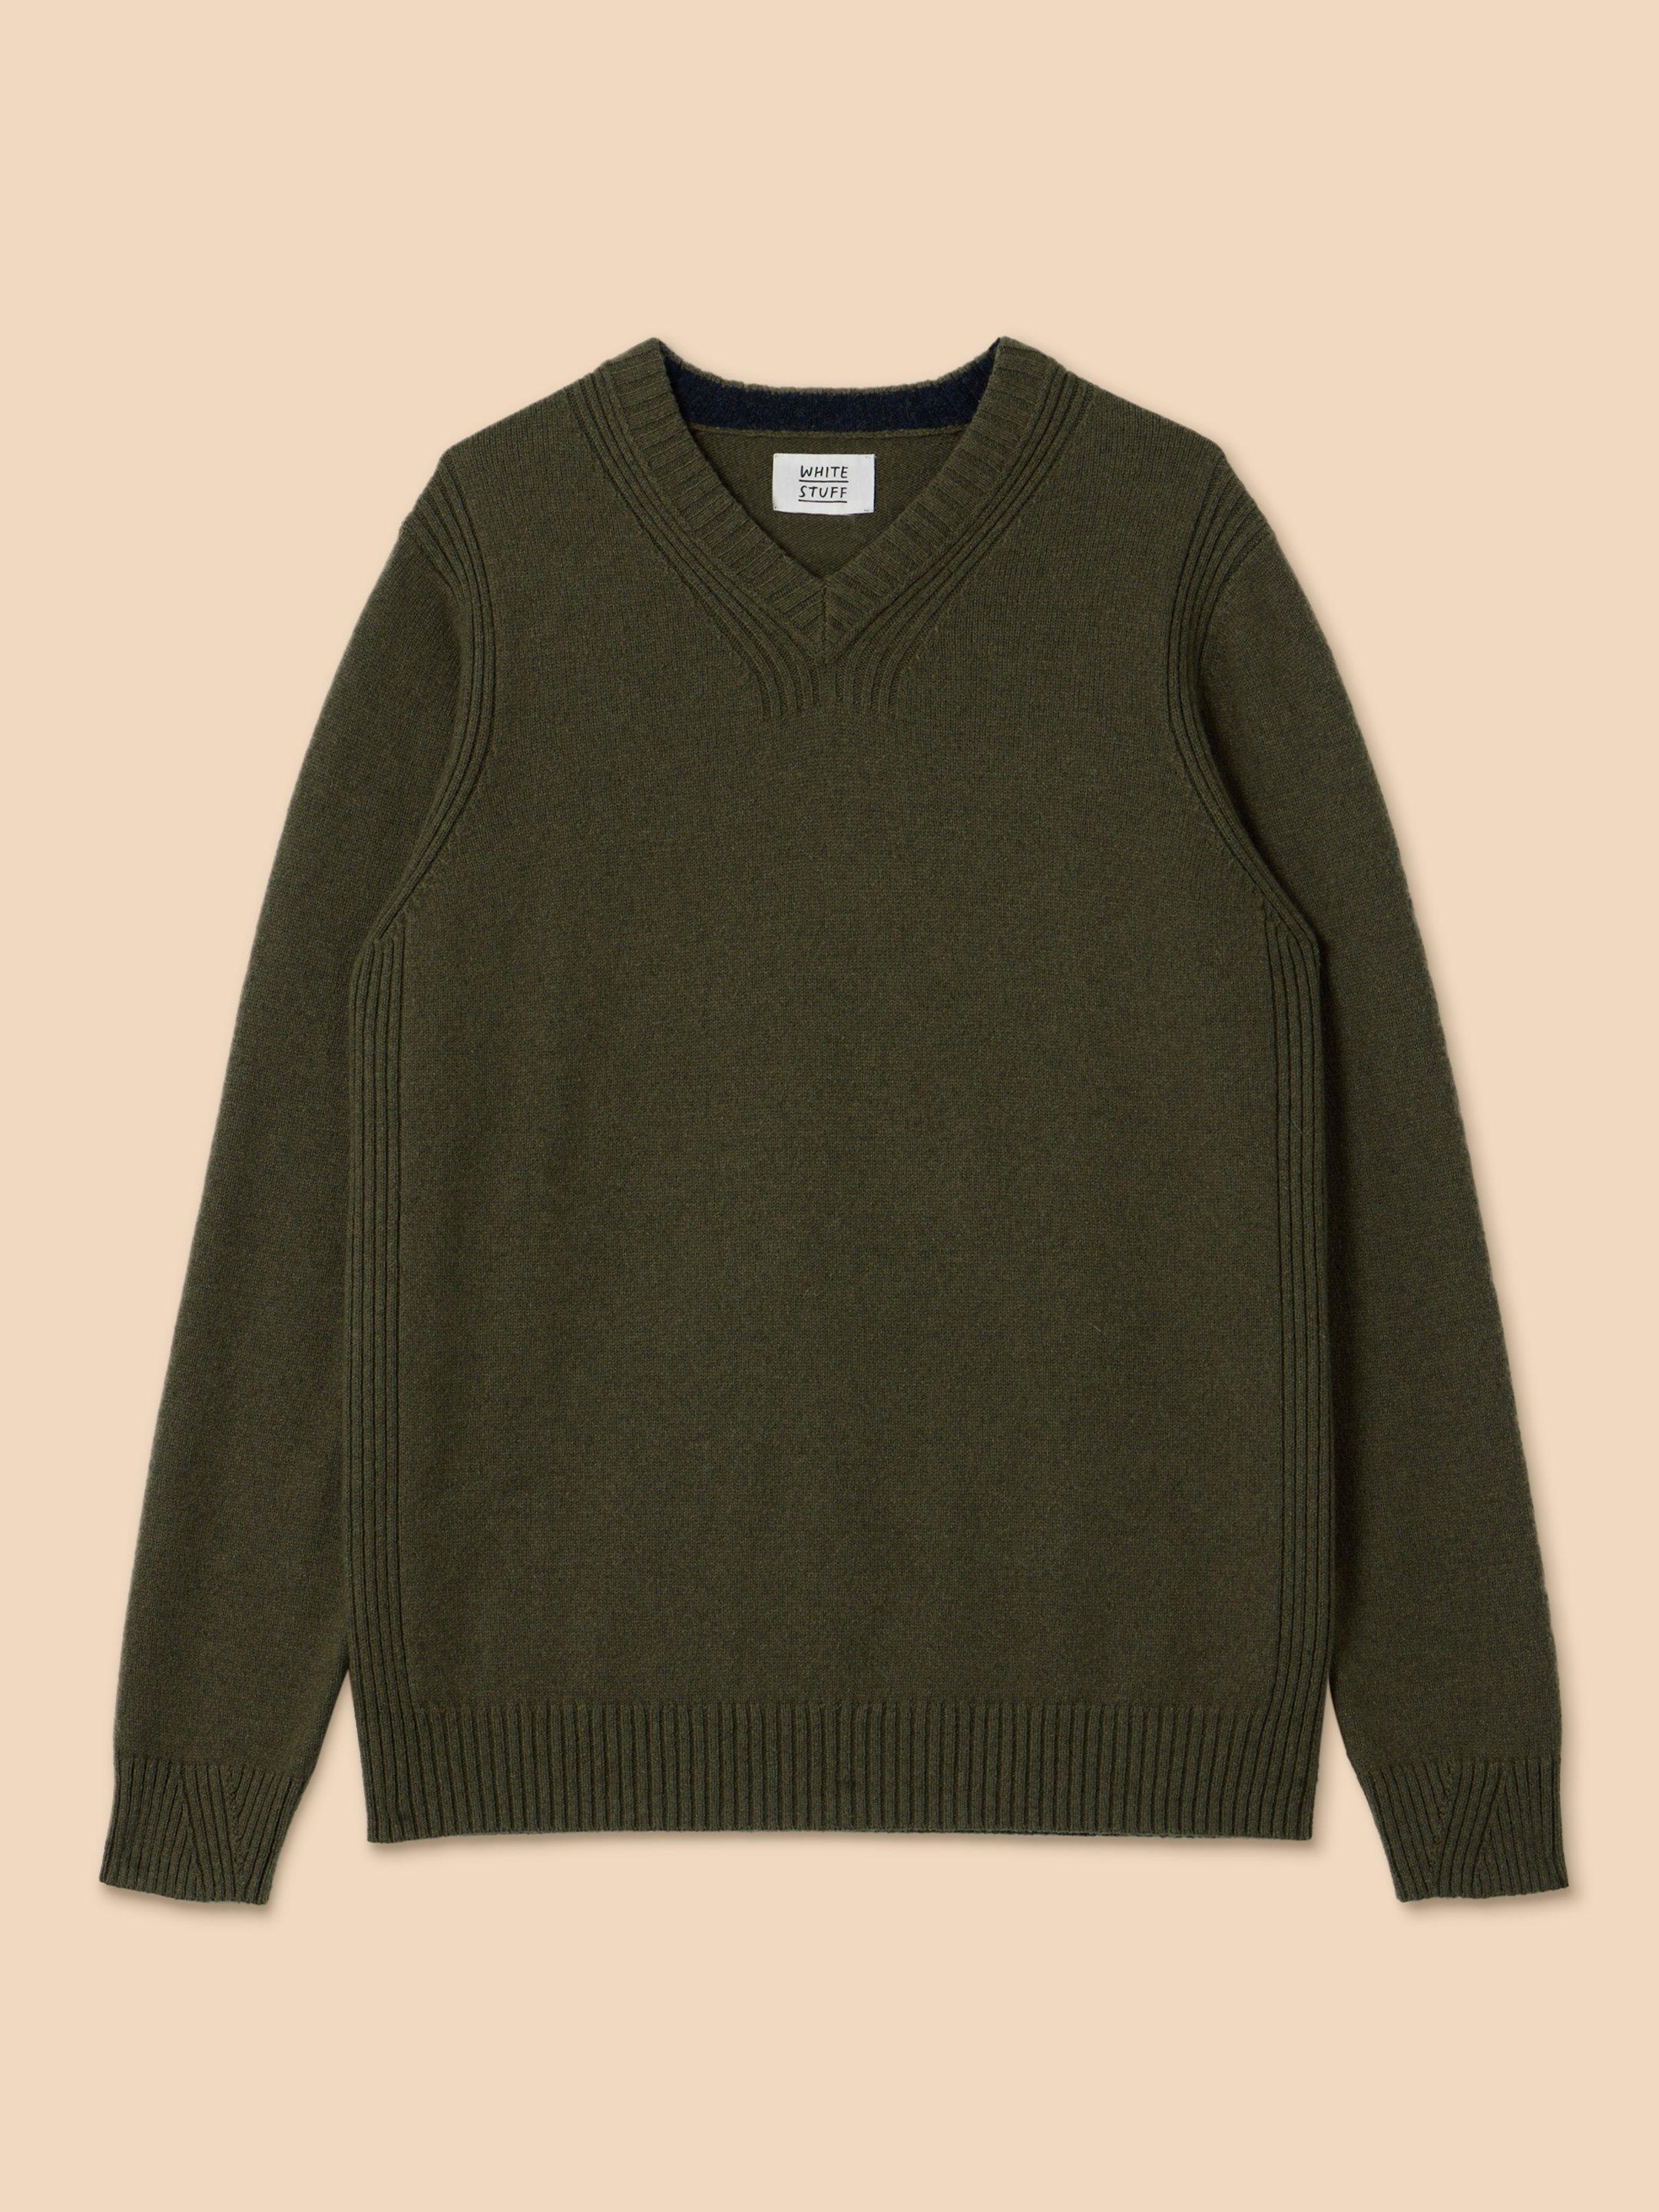 Lambswool V Neck in DK GREEN - FLAT FRONT